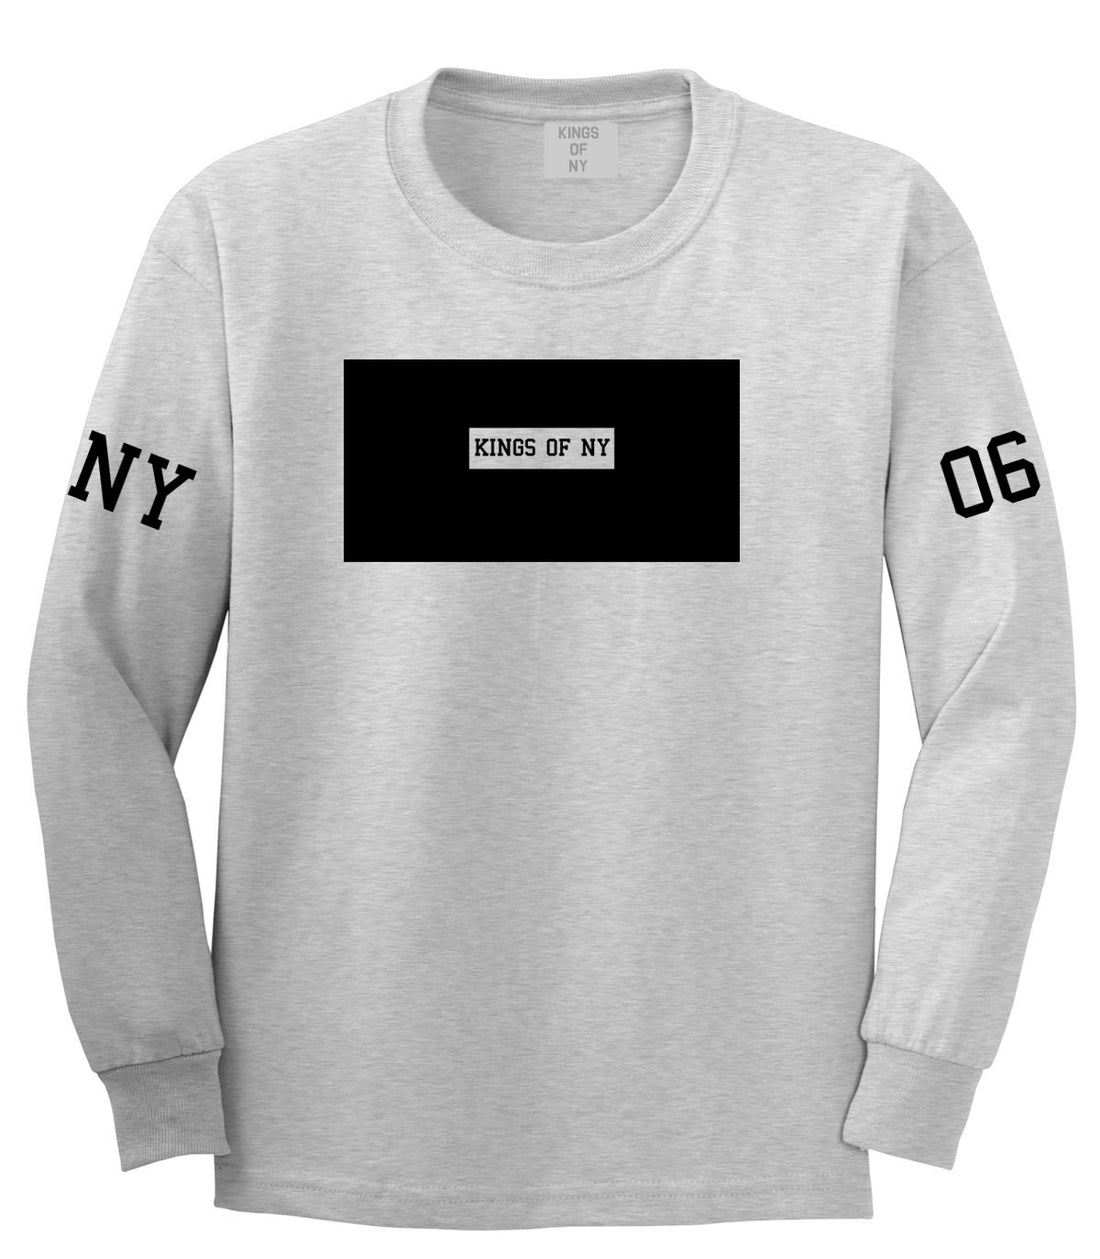 New York Logo 2006 Style Trill Long Sleeve Boys Kids T-Shirt In Grey by Kings Of NY